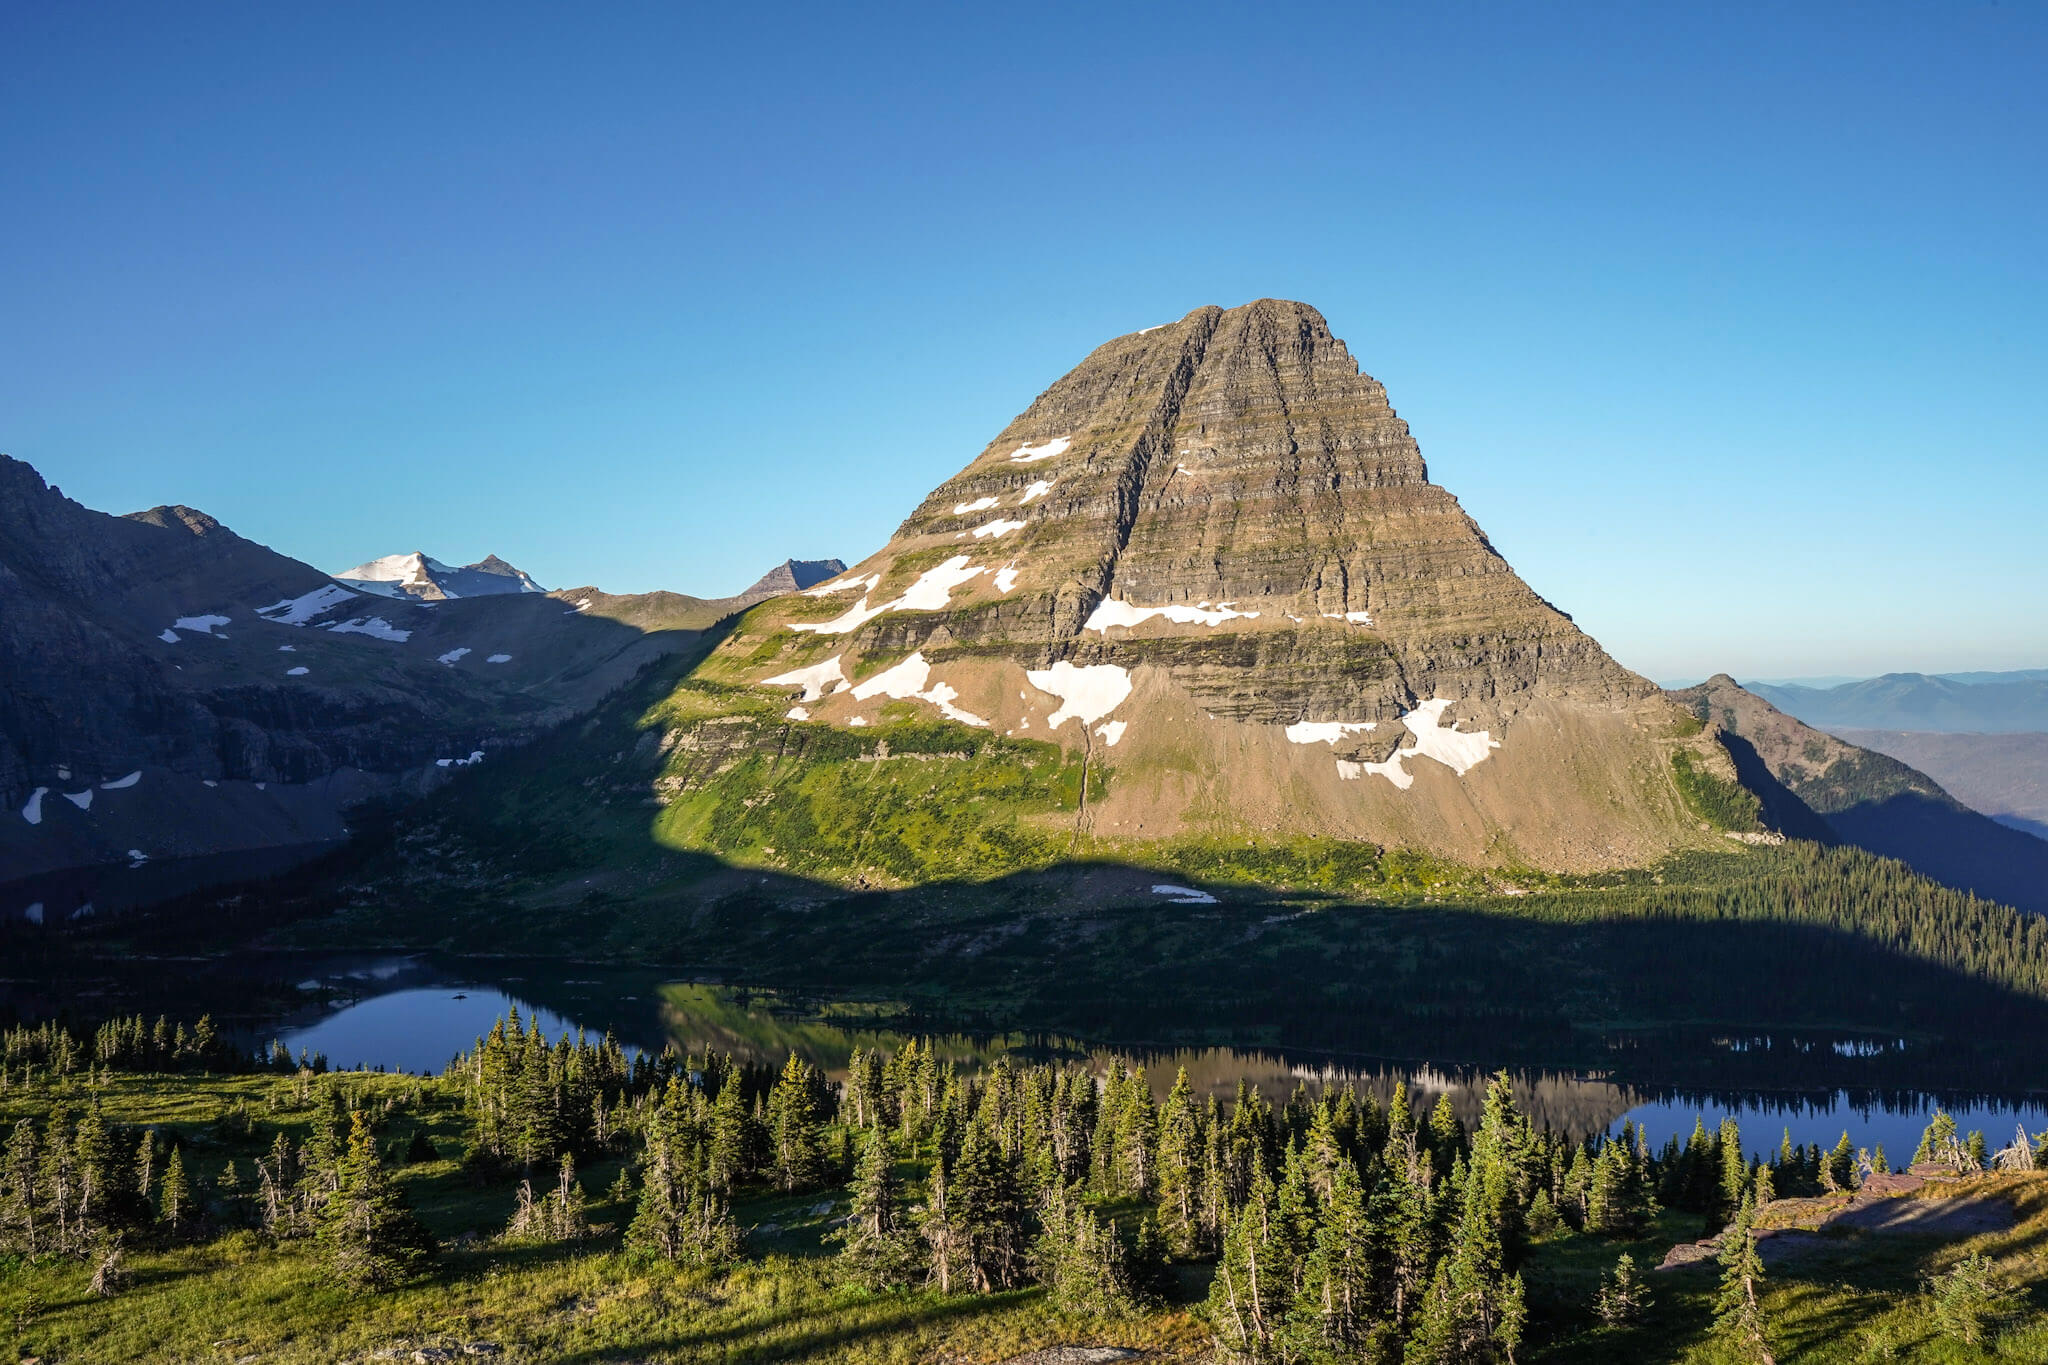 A lone mountain with patches of snow towers over Hidden Lake in Glacier National Park surrounded by trees along the shore with a bright blue sky.